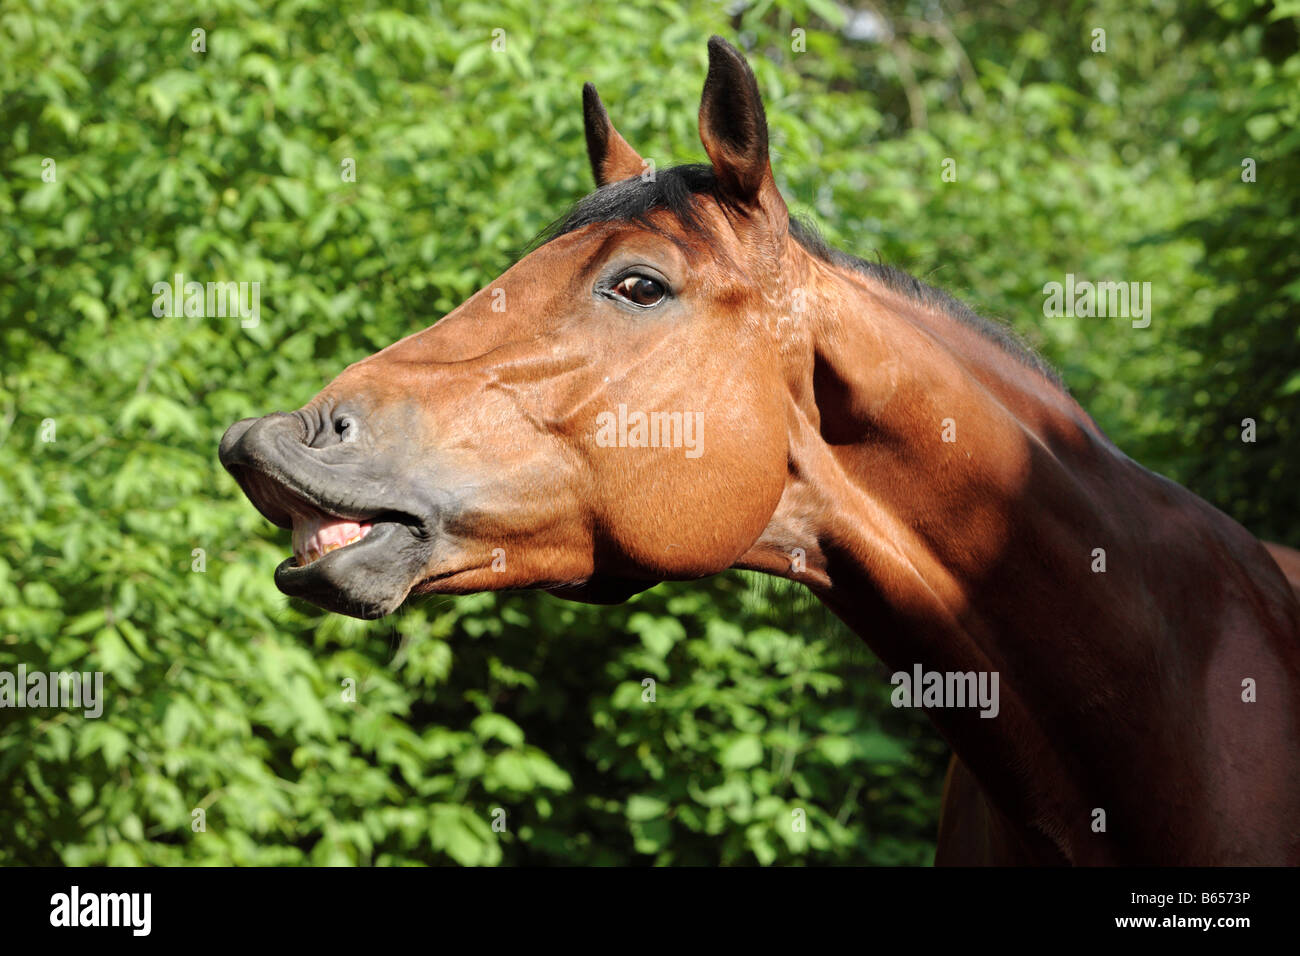 A neighing horse Stock Photo